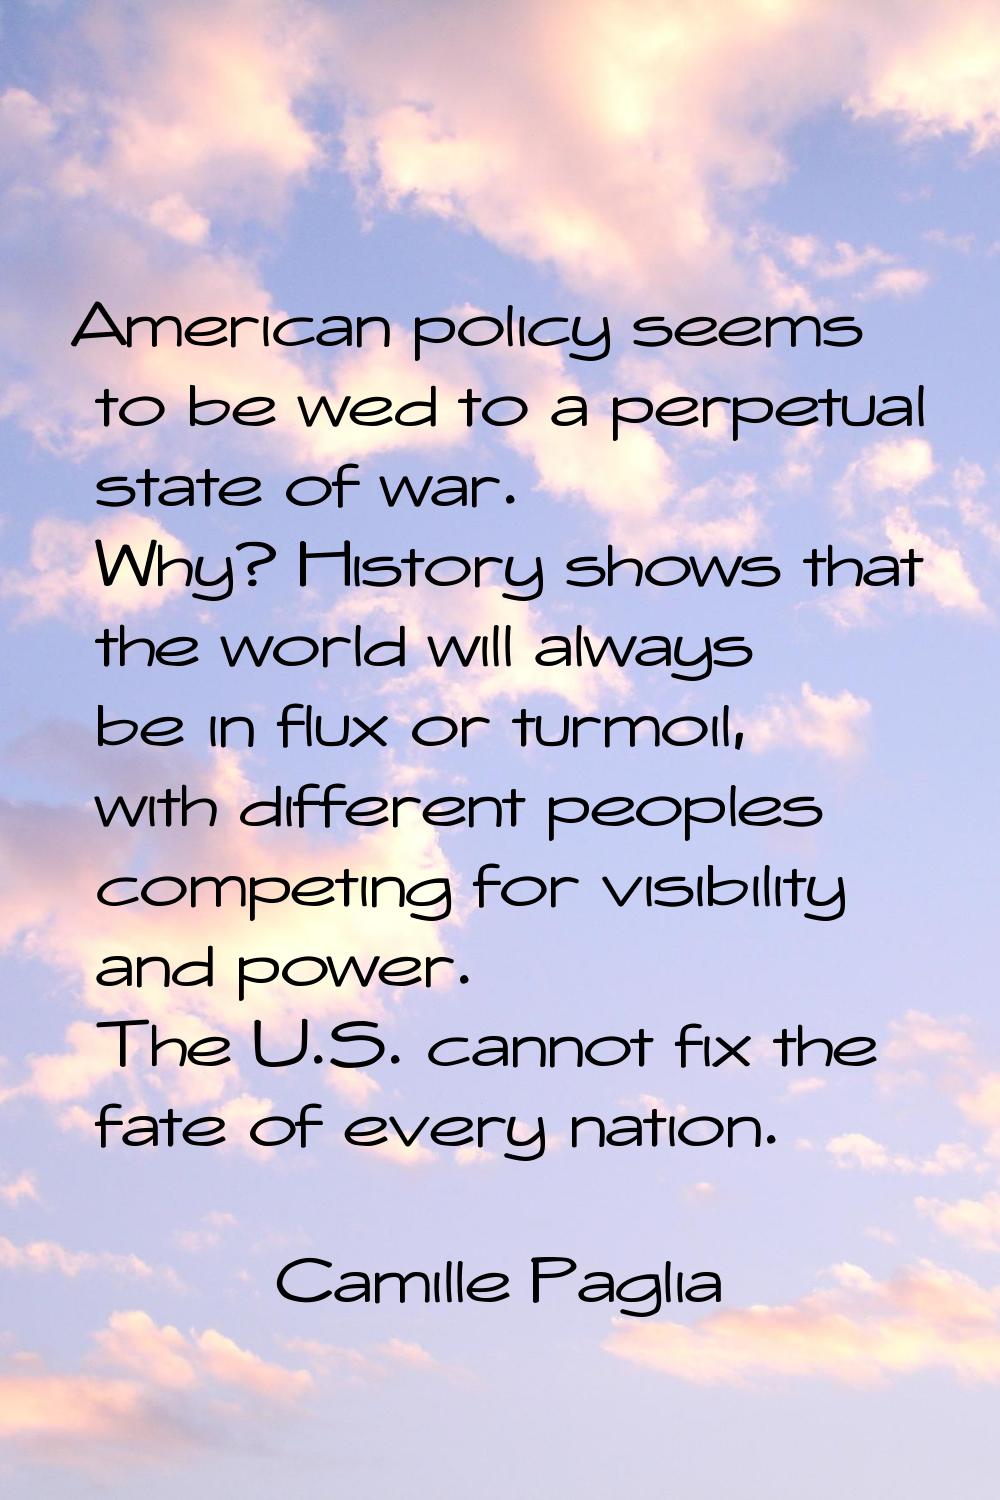 American policy seems to be wed to a perpetual state of war. Why? History shows that the world will